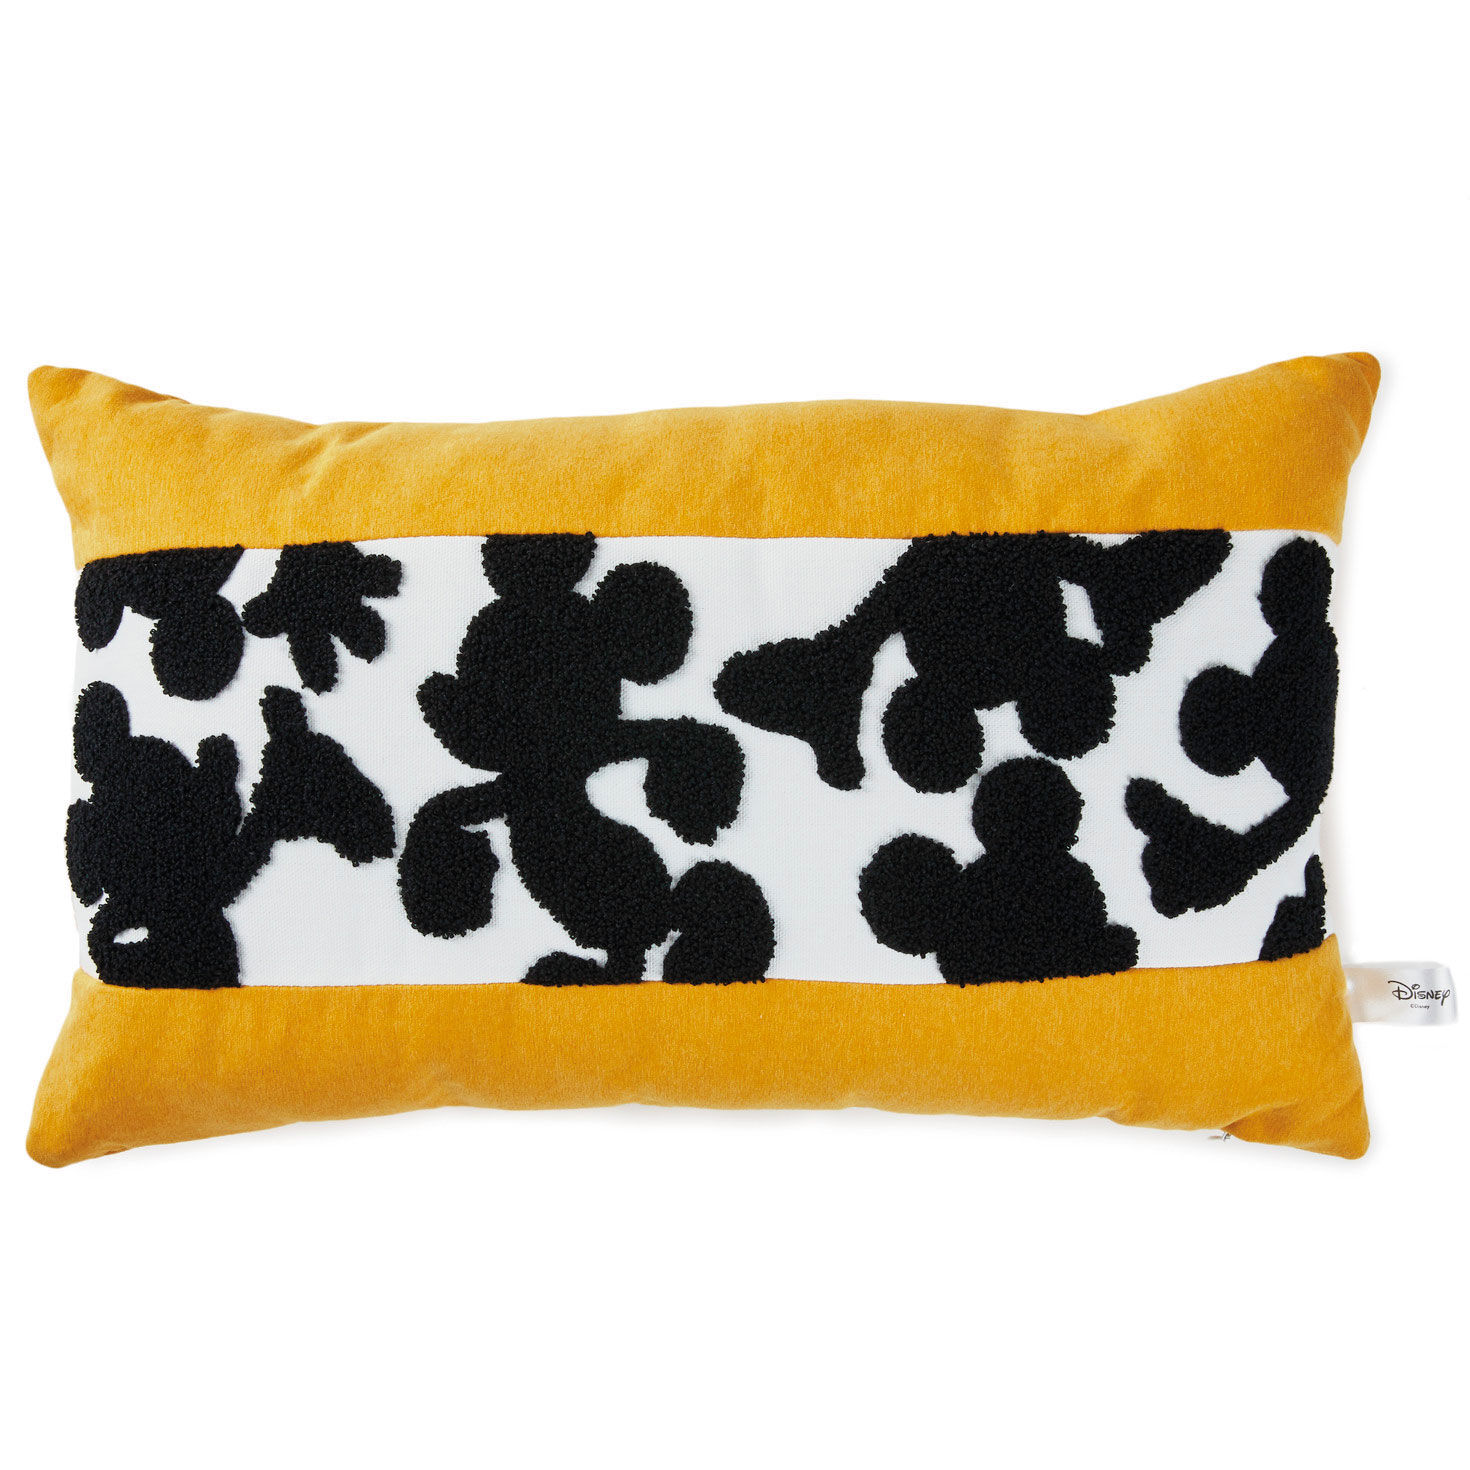 https://www.hallmark.com/dw/image/v2/AALB_PRD/on/demandware.static/-/Sites-hallmark-master/default/dw986aae87/images/finished-goods/products/1DYG2057/Mickey-Mouse-Silhouettes-Rectangle-Throw-Pillow_1DYG2057_01.jpg?sfrm=jpg